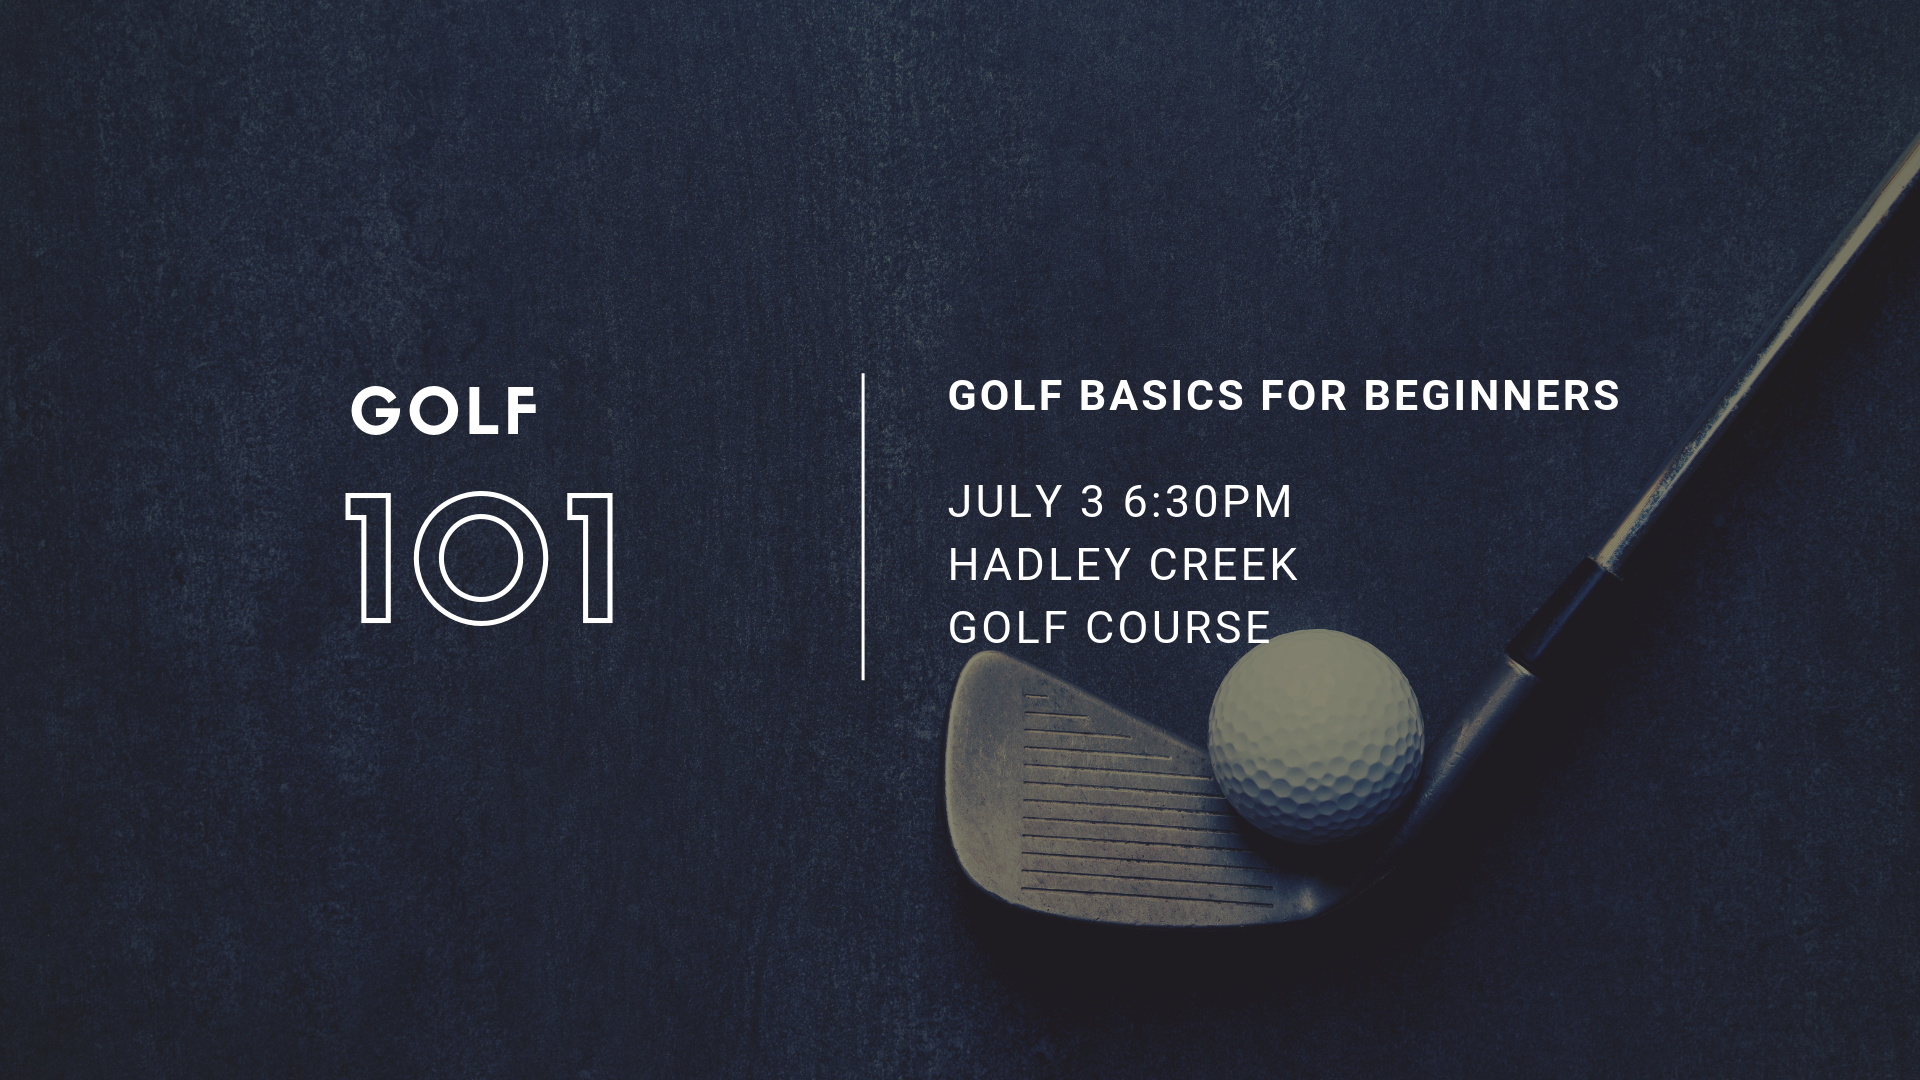 Golf 101- Golf clinic for begginers